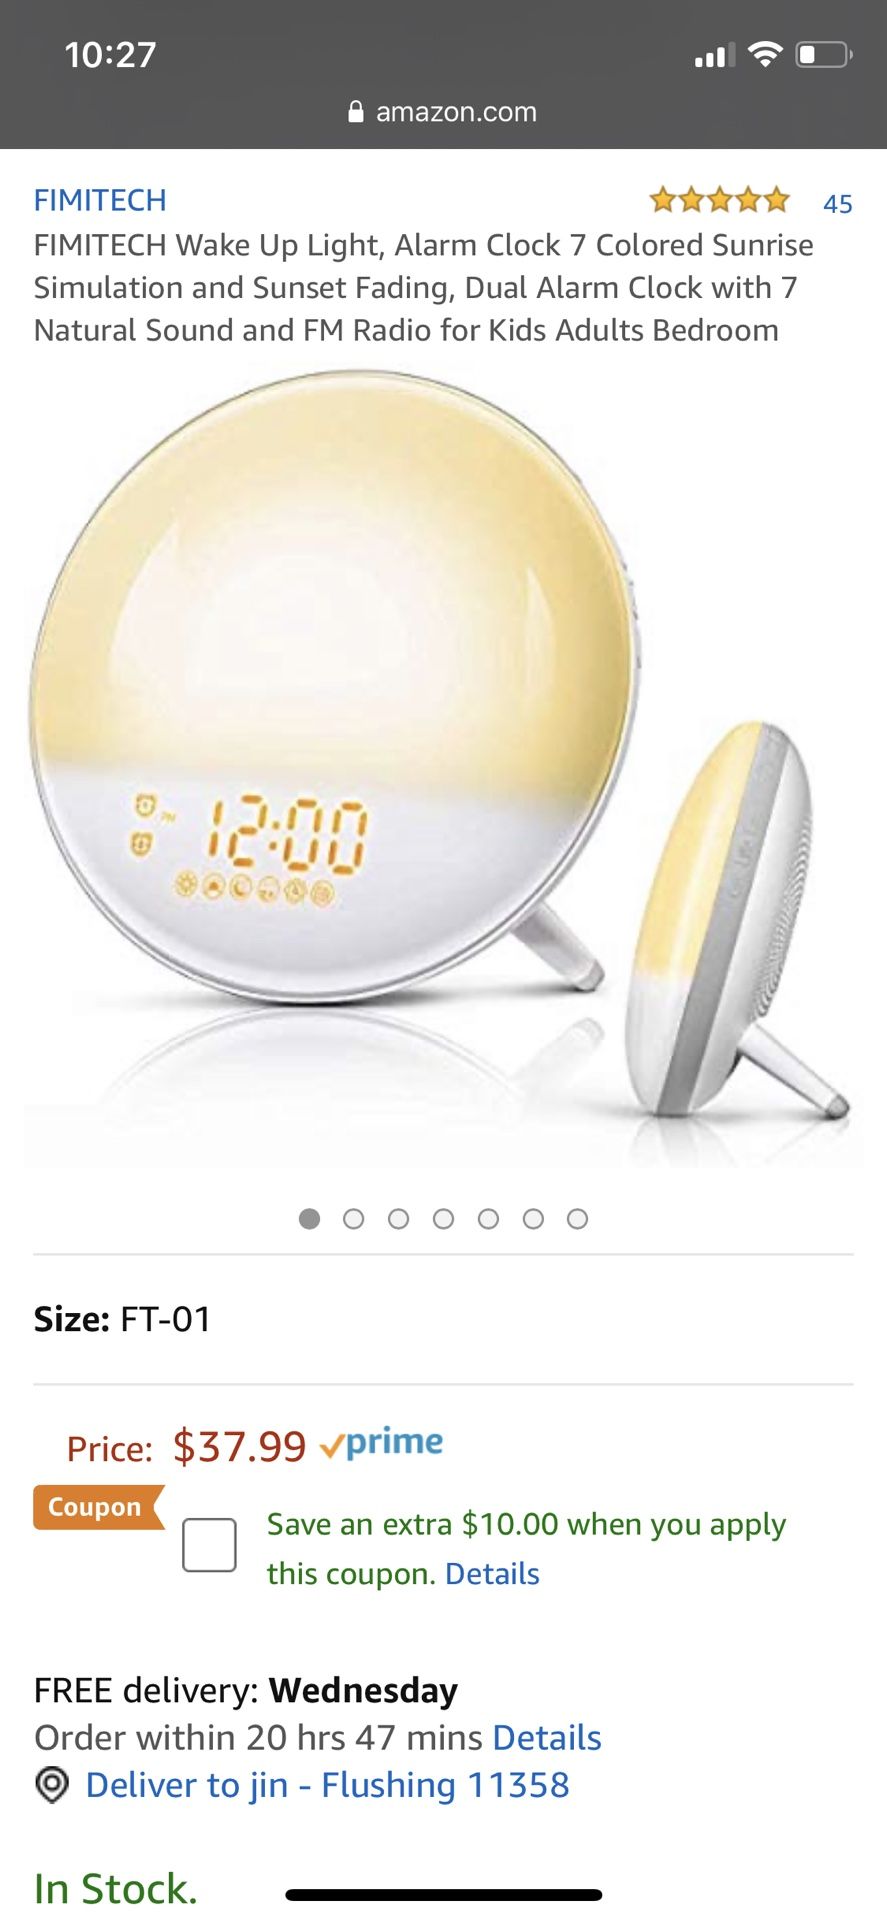 FIMITECH Wake Up Light, Alarm Clock 7 Colored Sunrise Simulation and Sunset Fading, Dual Alarm Clock with 7 Natural Sound and FM Radio for Kids Adult